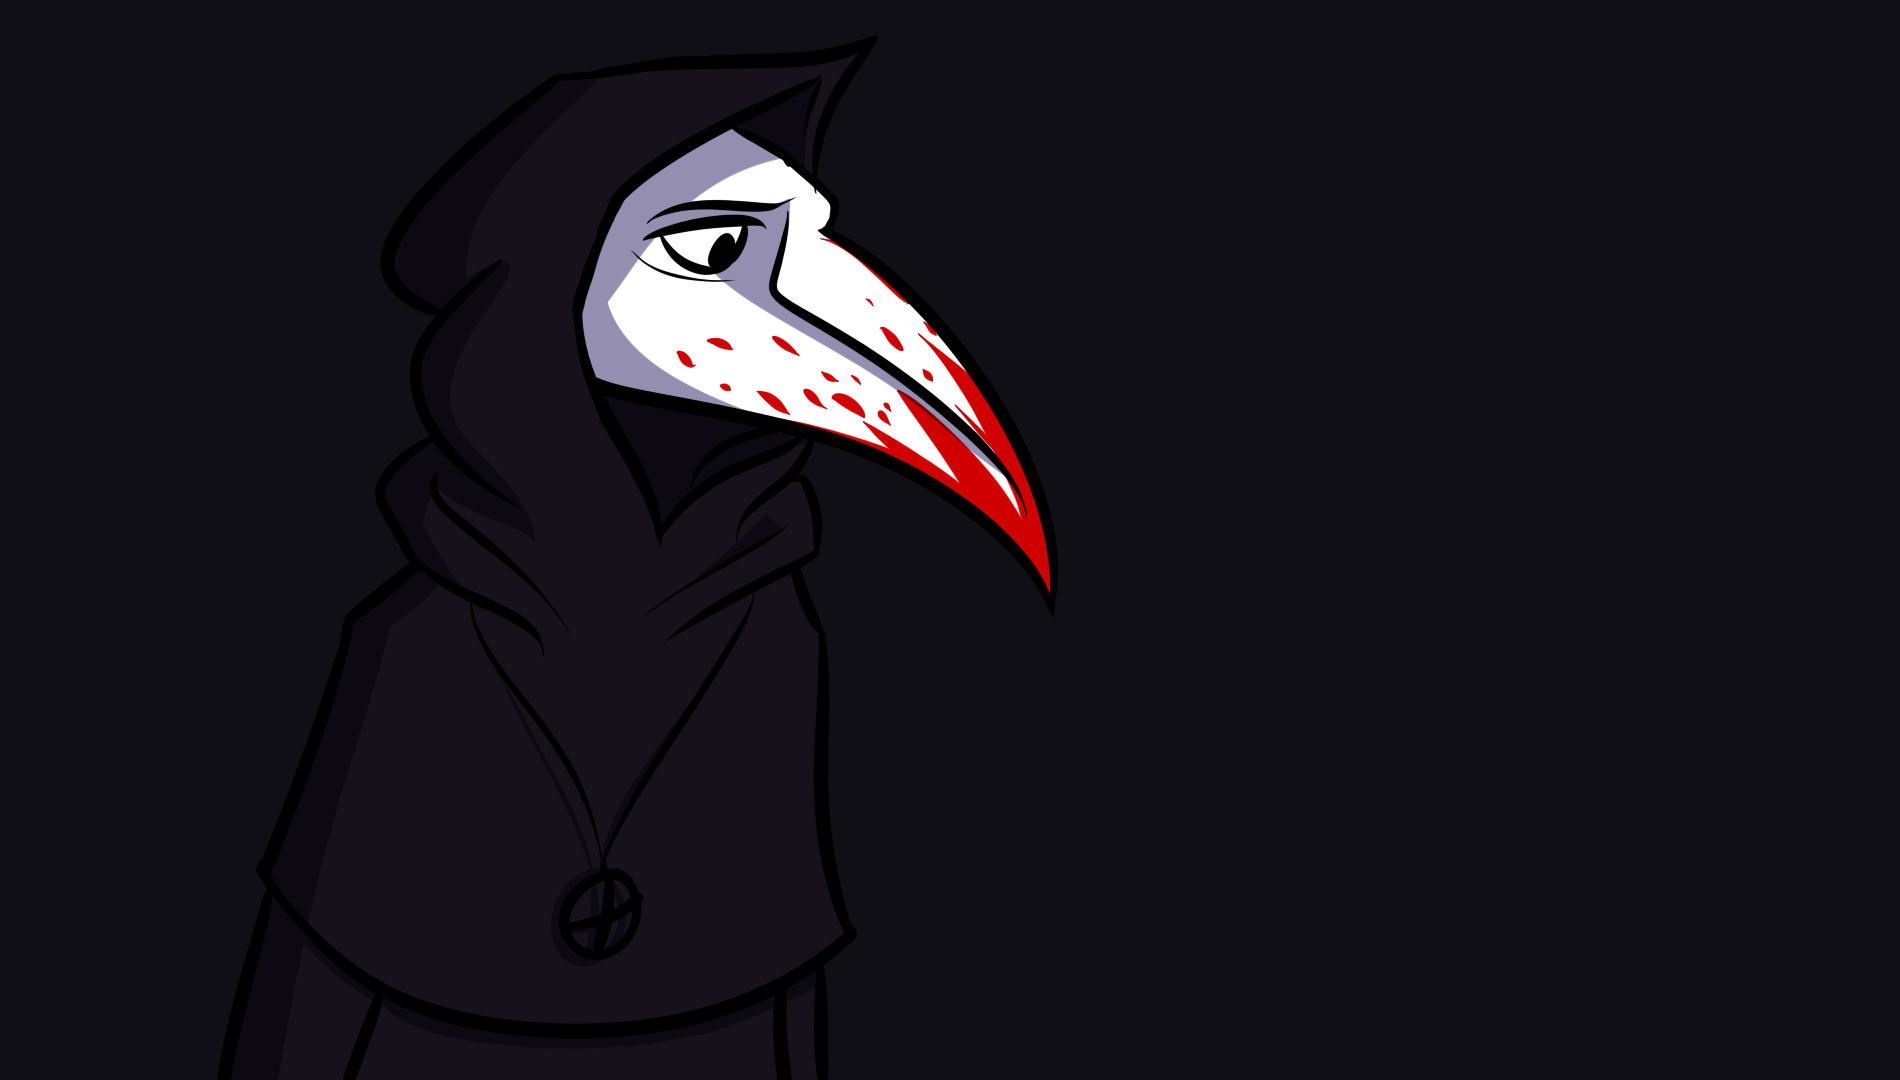 scp_049_by_mimi_fox-d7brg6p.png